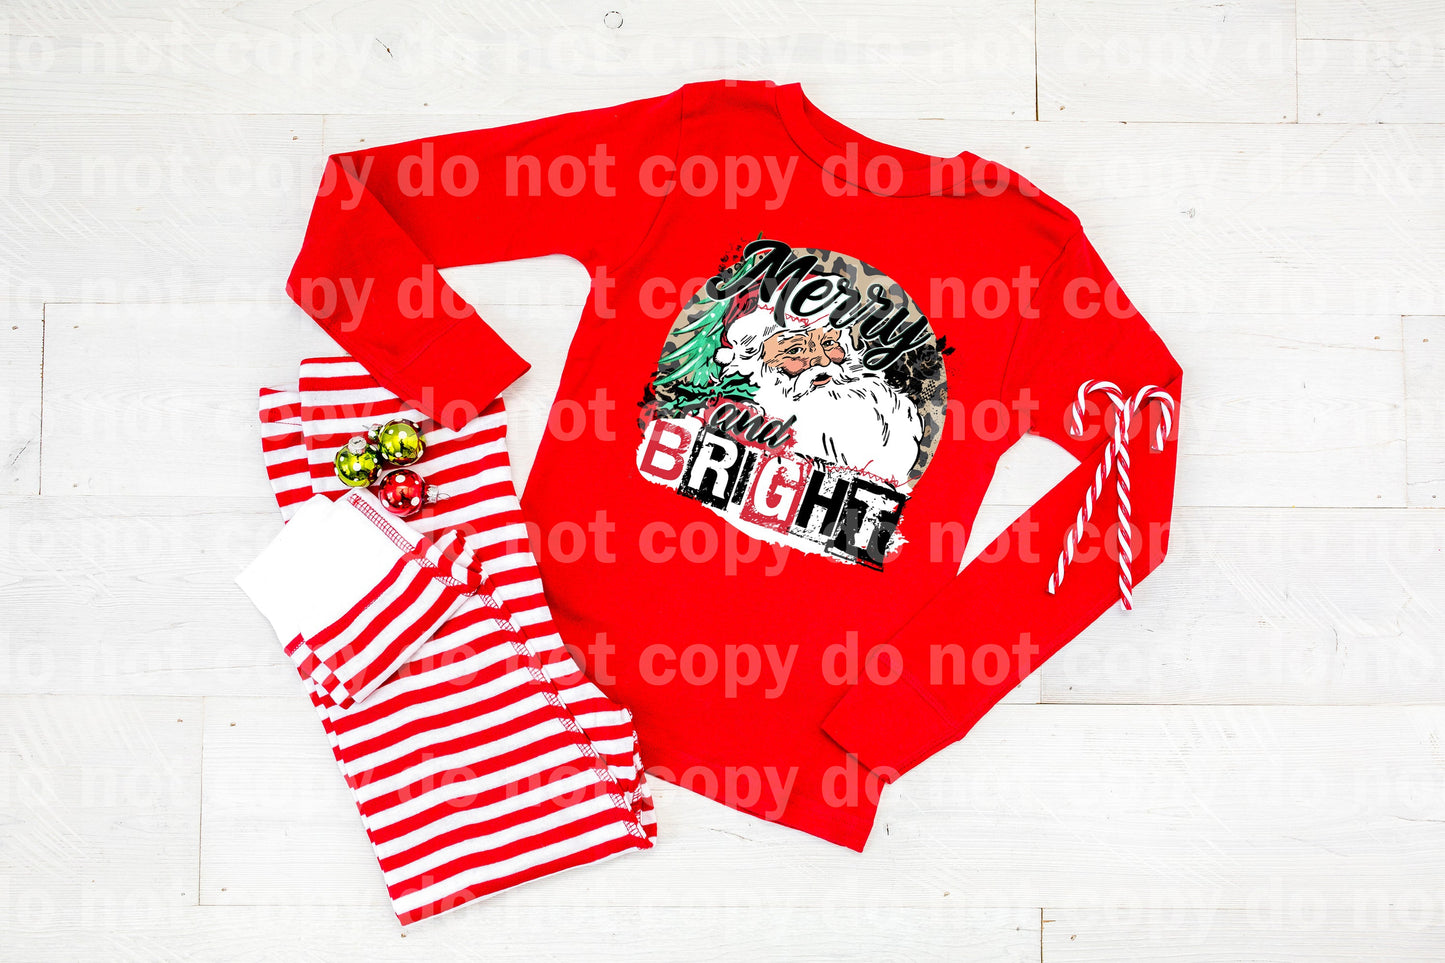 Merry And Bright Santa Dream Print or Sublimation Print